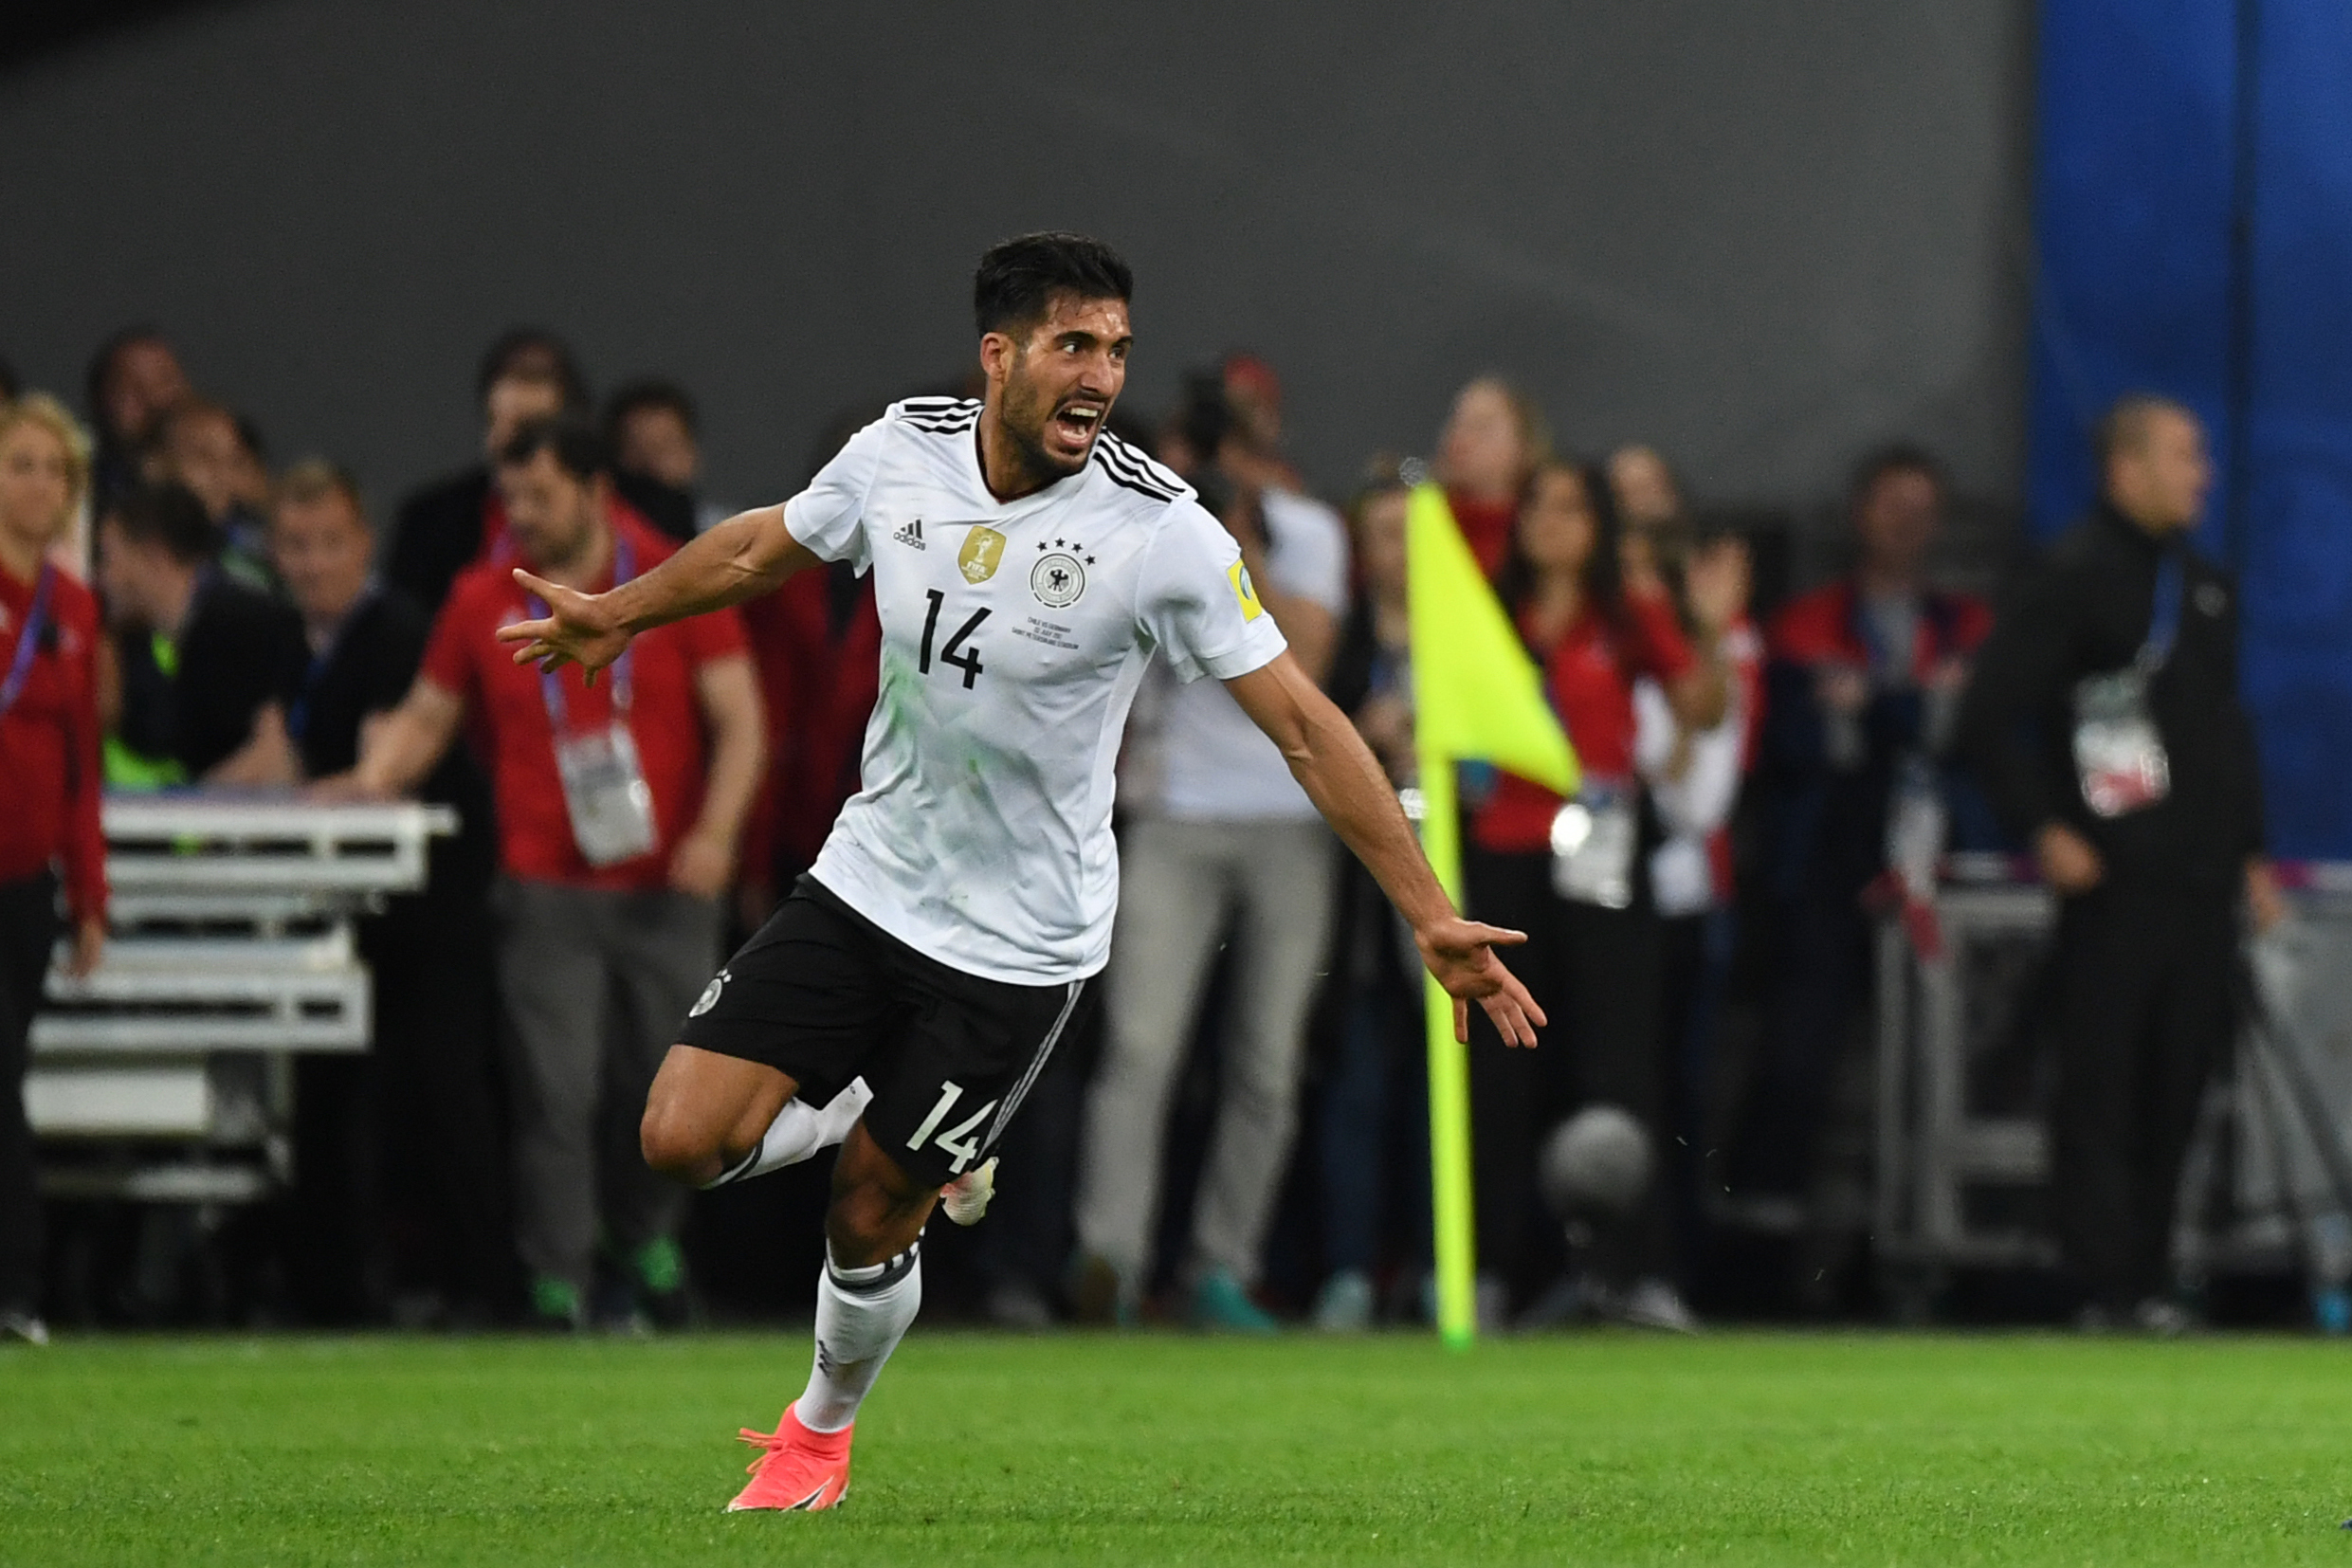 Germany's midfielder Emre Can celebrates winning the 2017 Confederations Cup final football match between Chile and Germany at the Saint Petersburg Stadium in Saint Petersburg on July 2, 2017. / AFP PHOTO / Kirill KUDRYAVTSEV        (Photo credit should read KIRILL KUDRYAVTSEV/AFP/Getty Images)